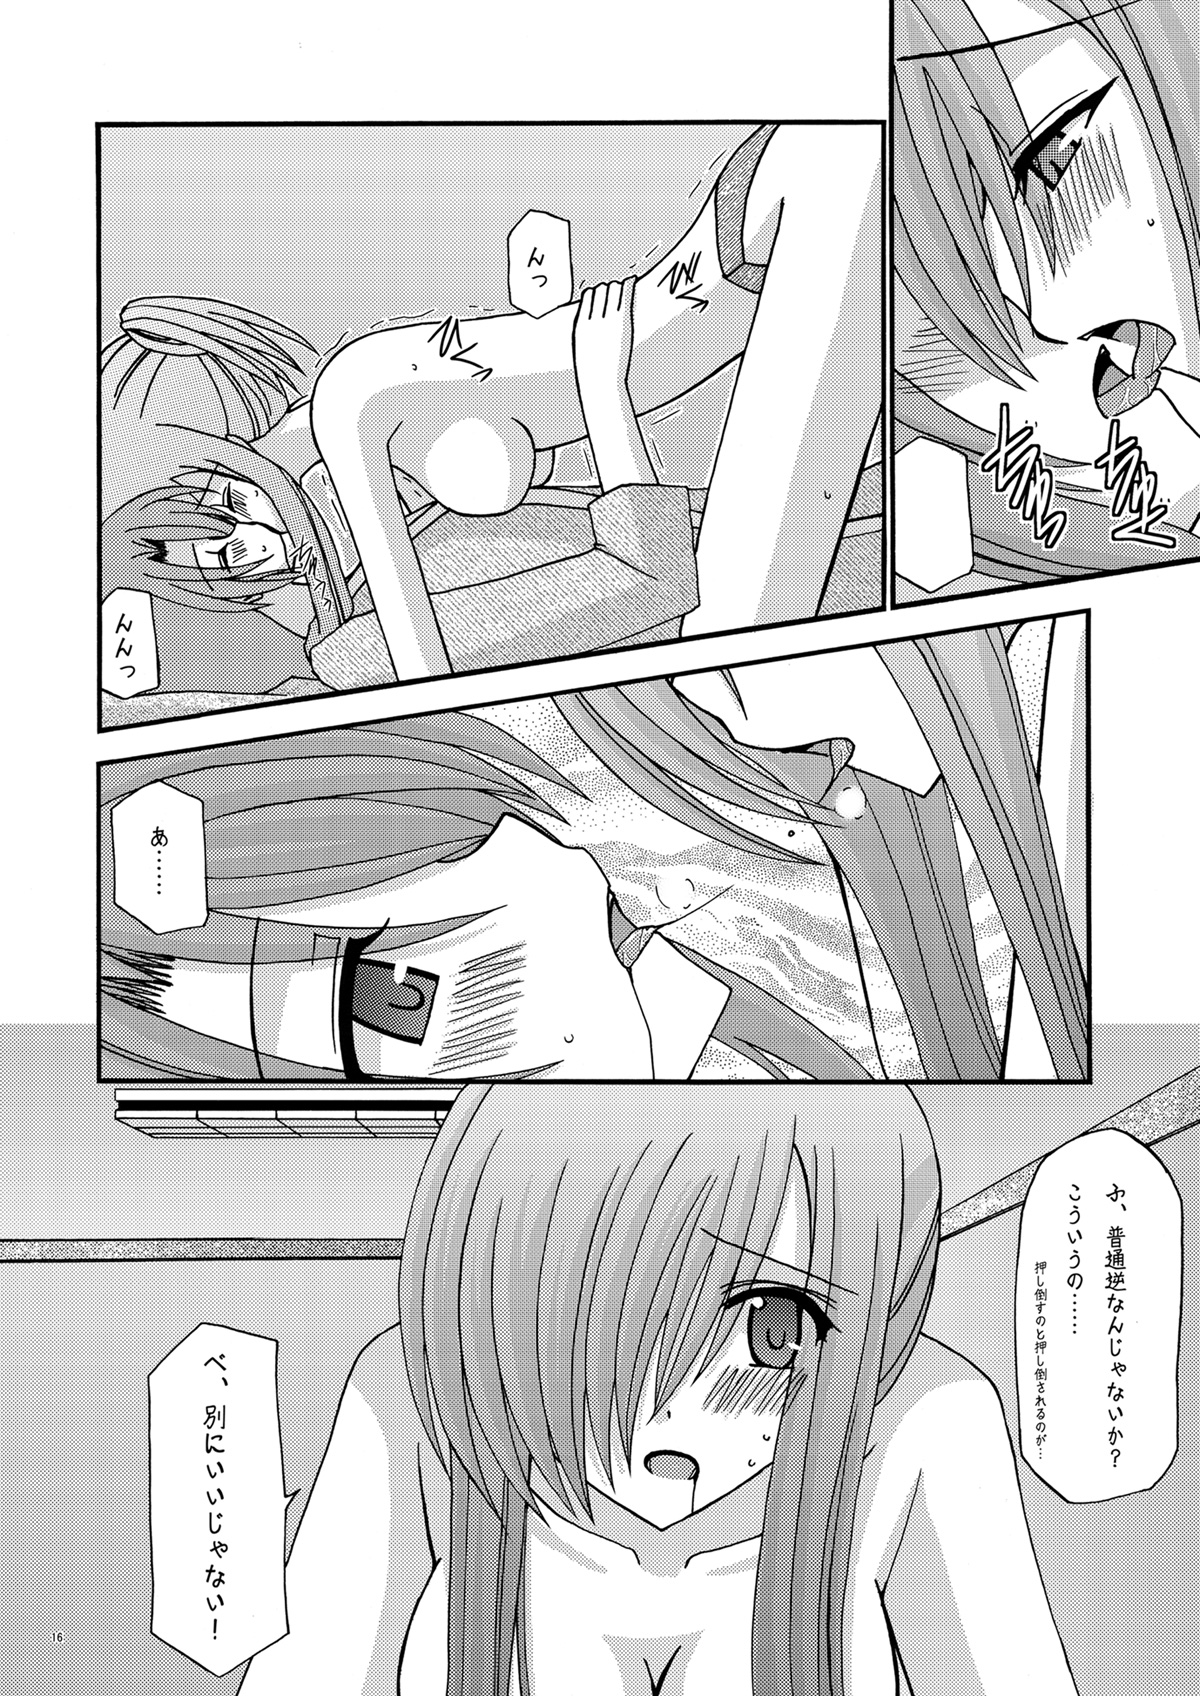 (SC32) [valssu (Charu)] Tear Luke! (Tales of the Abyss) page 16 full